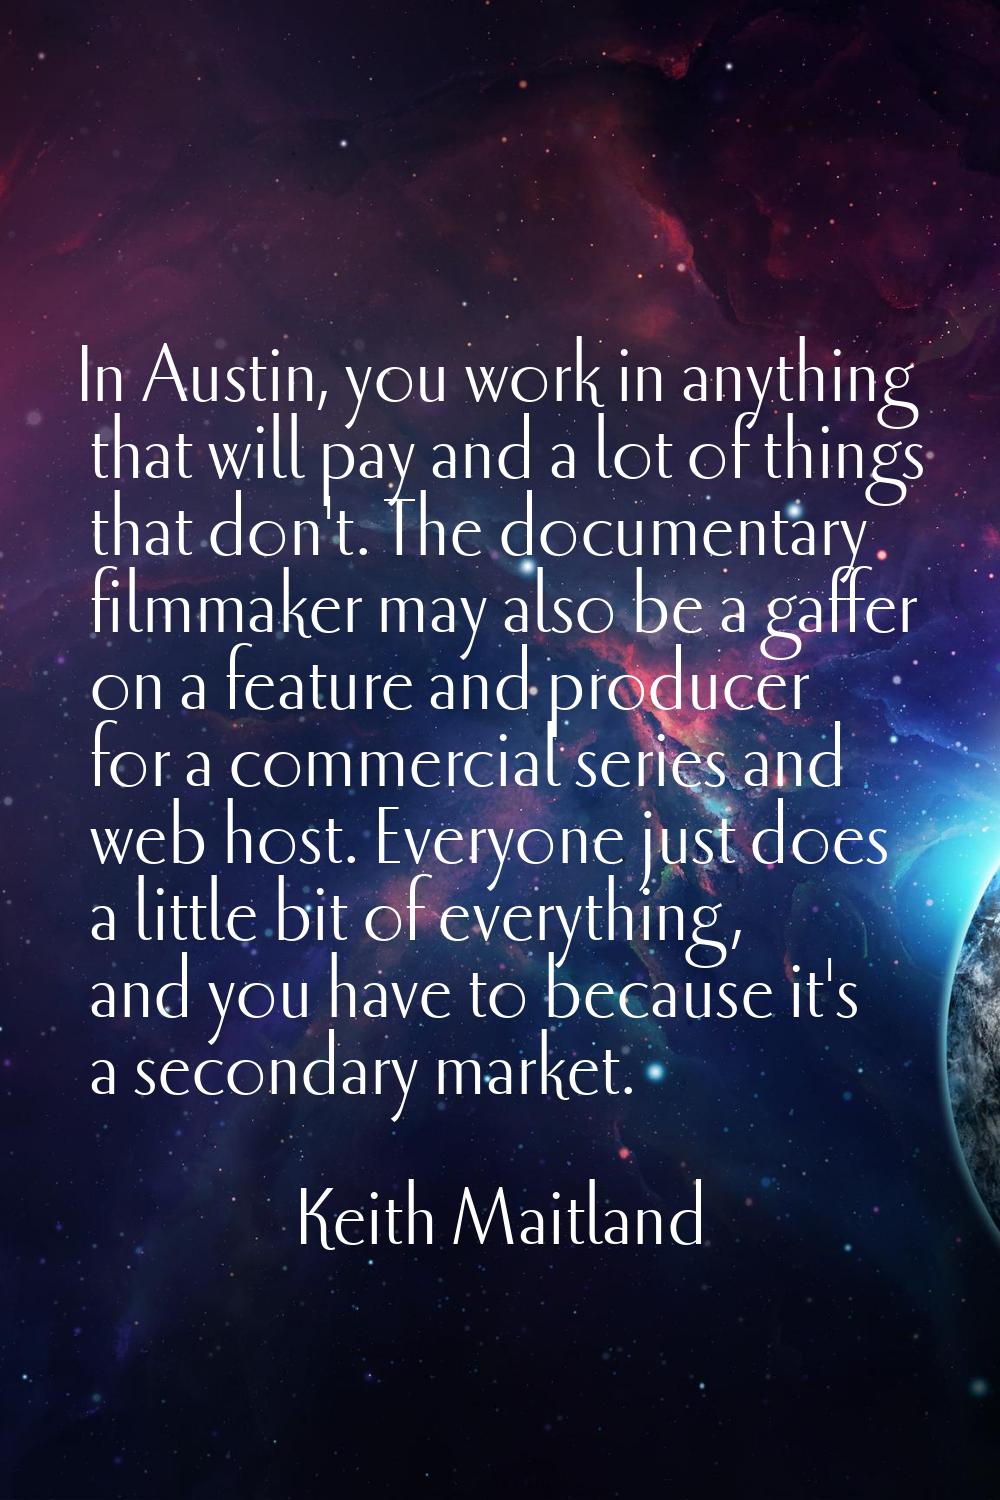 In Austin, you work in anything that will pay and a lot of things that don't. The documentary filmm